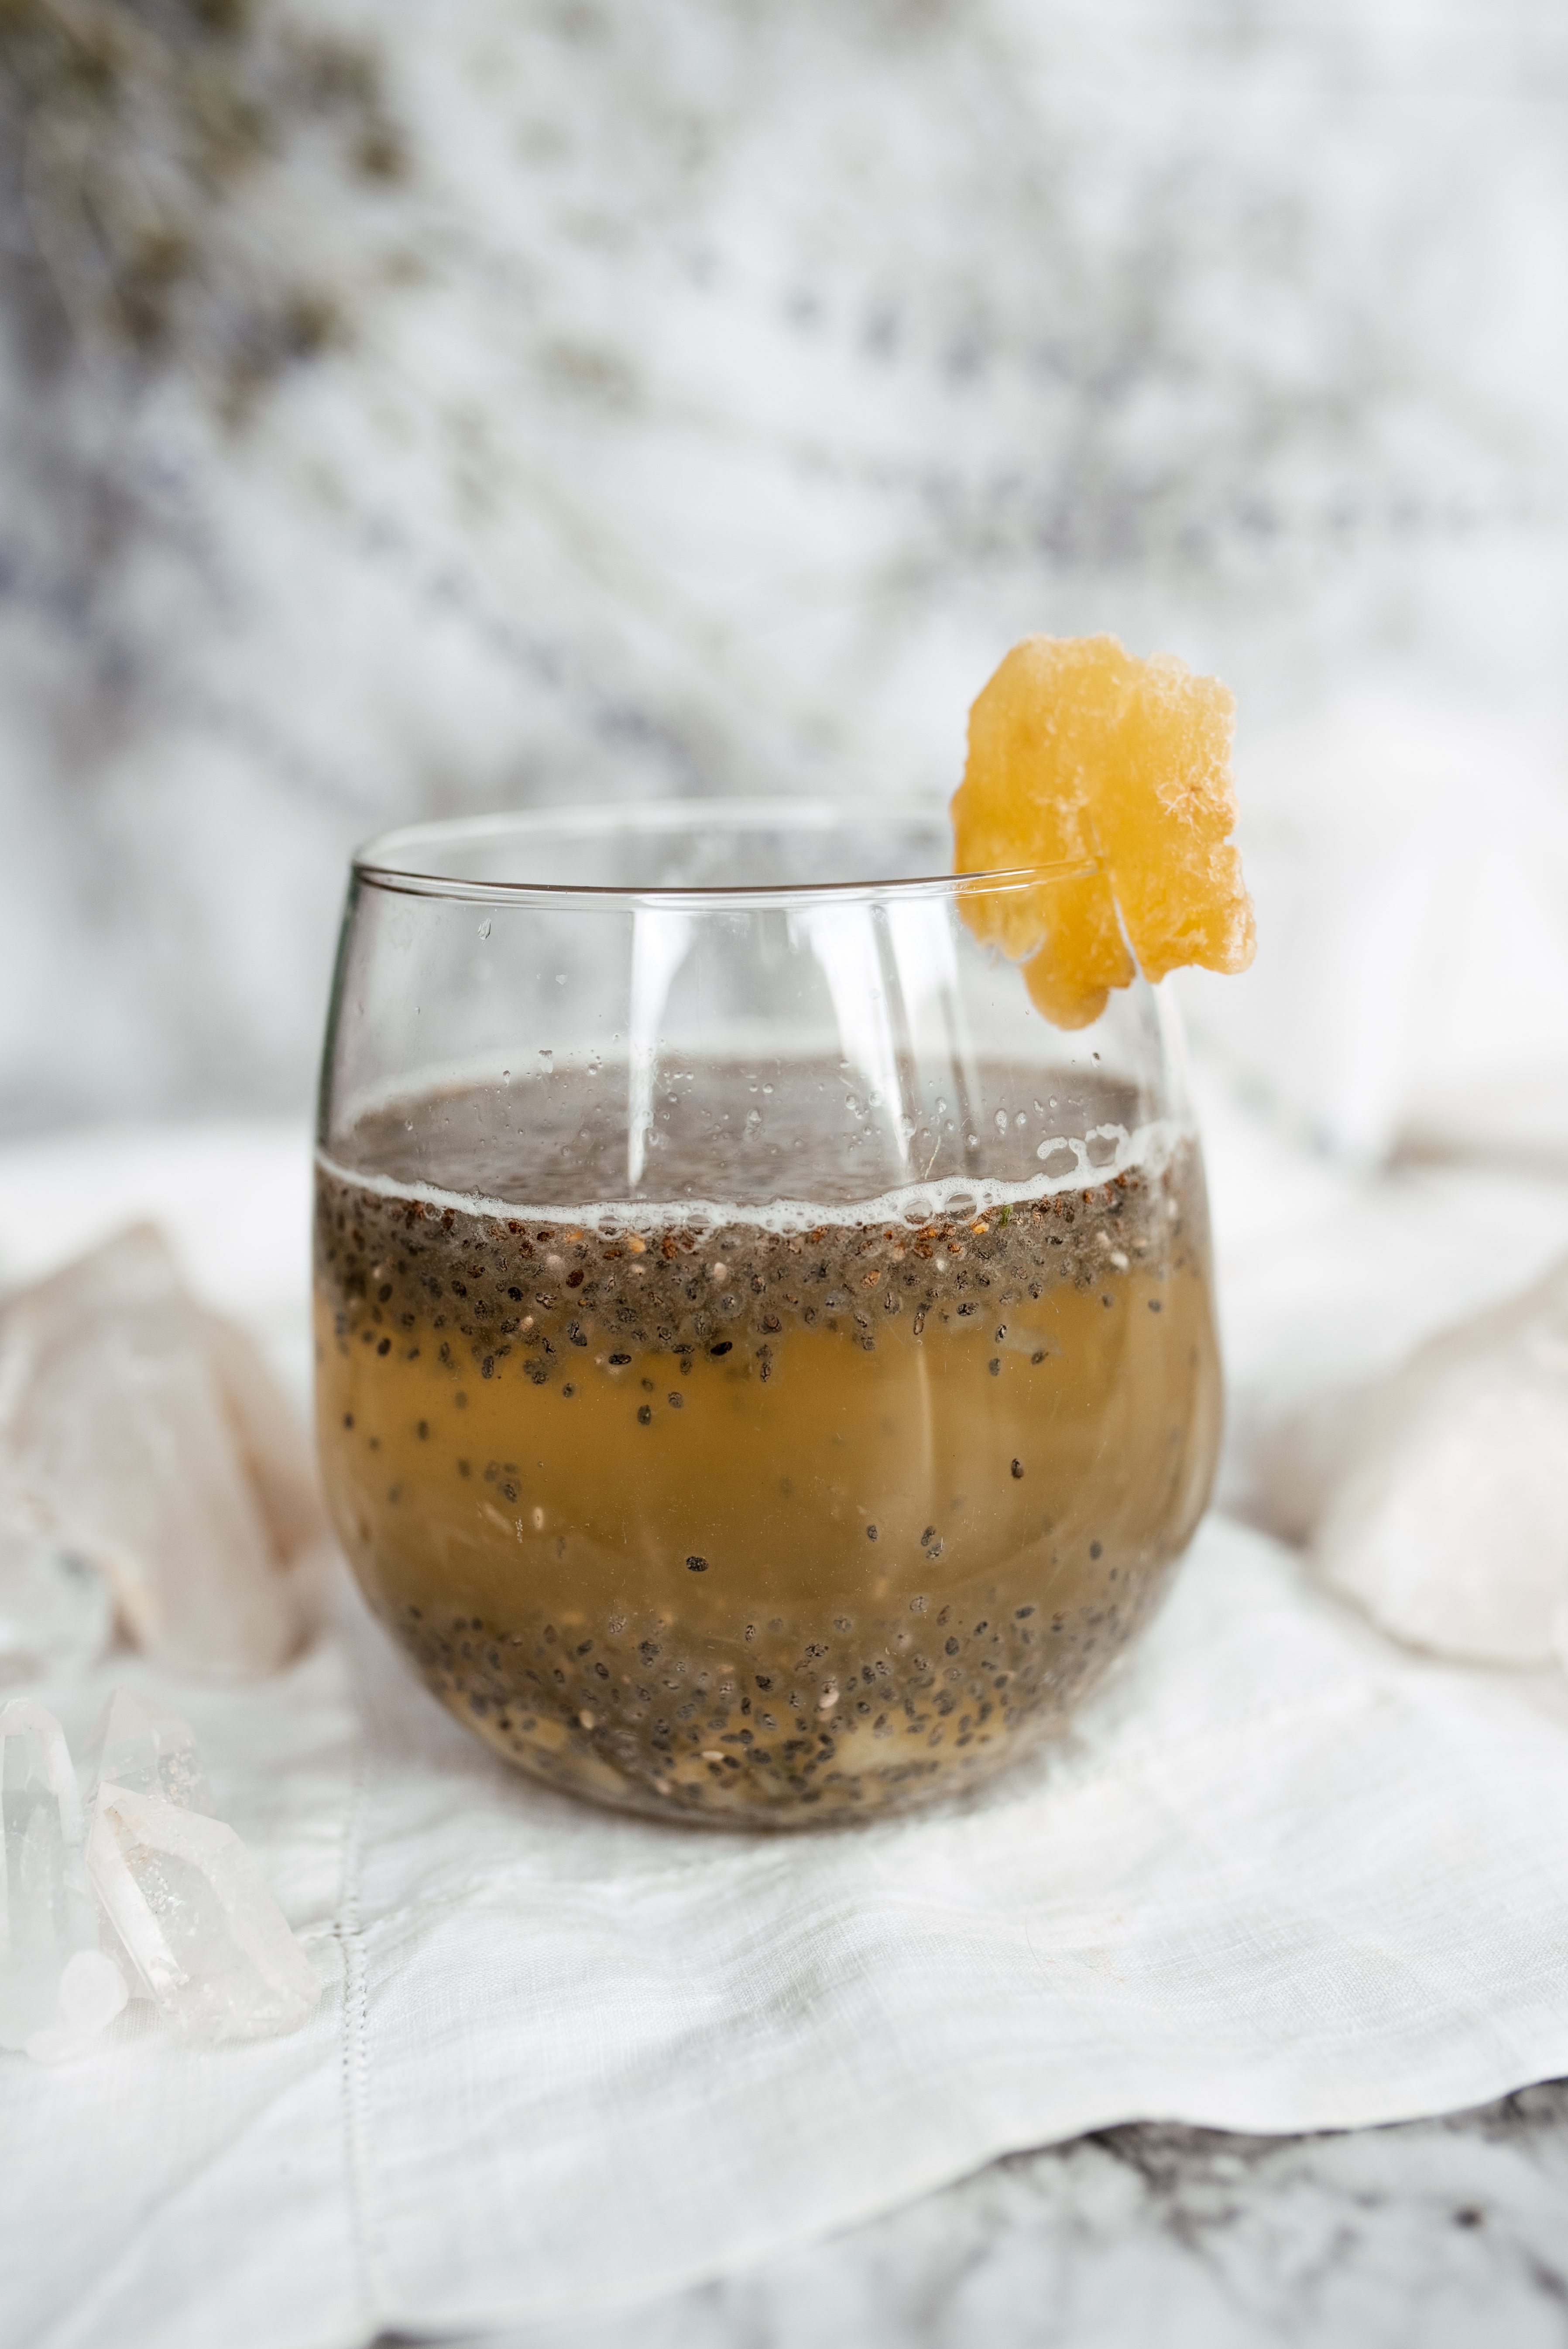 Chia Seed Ginger Water